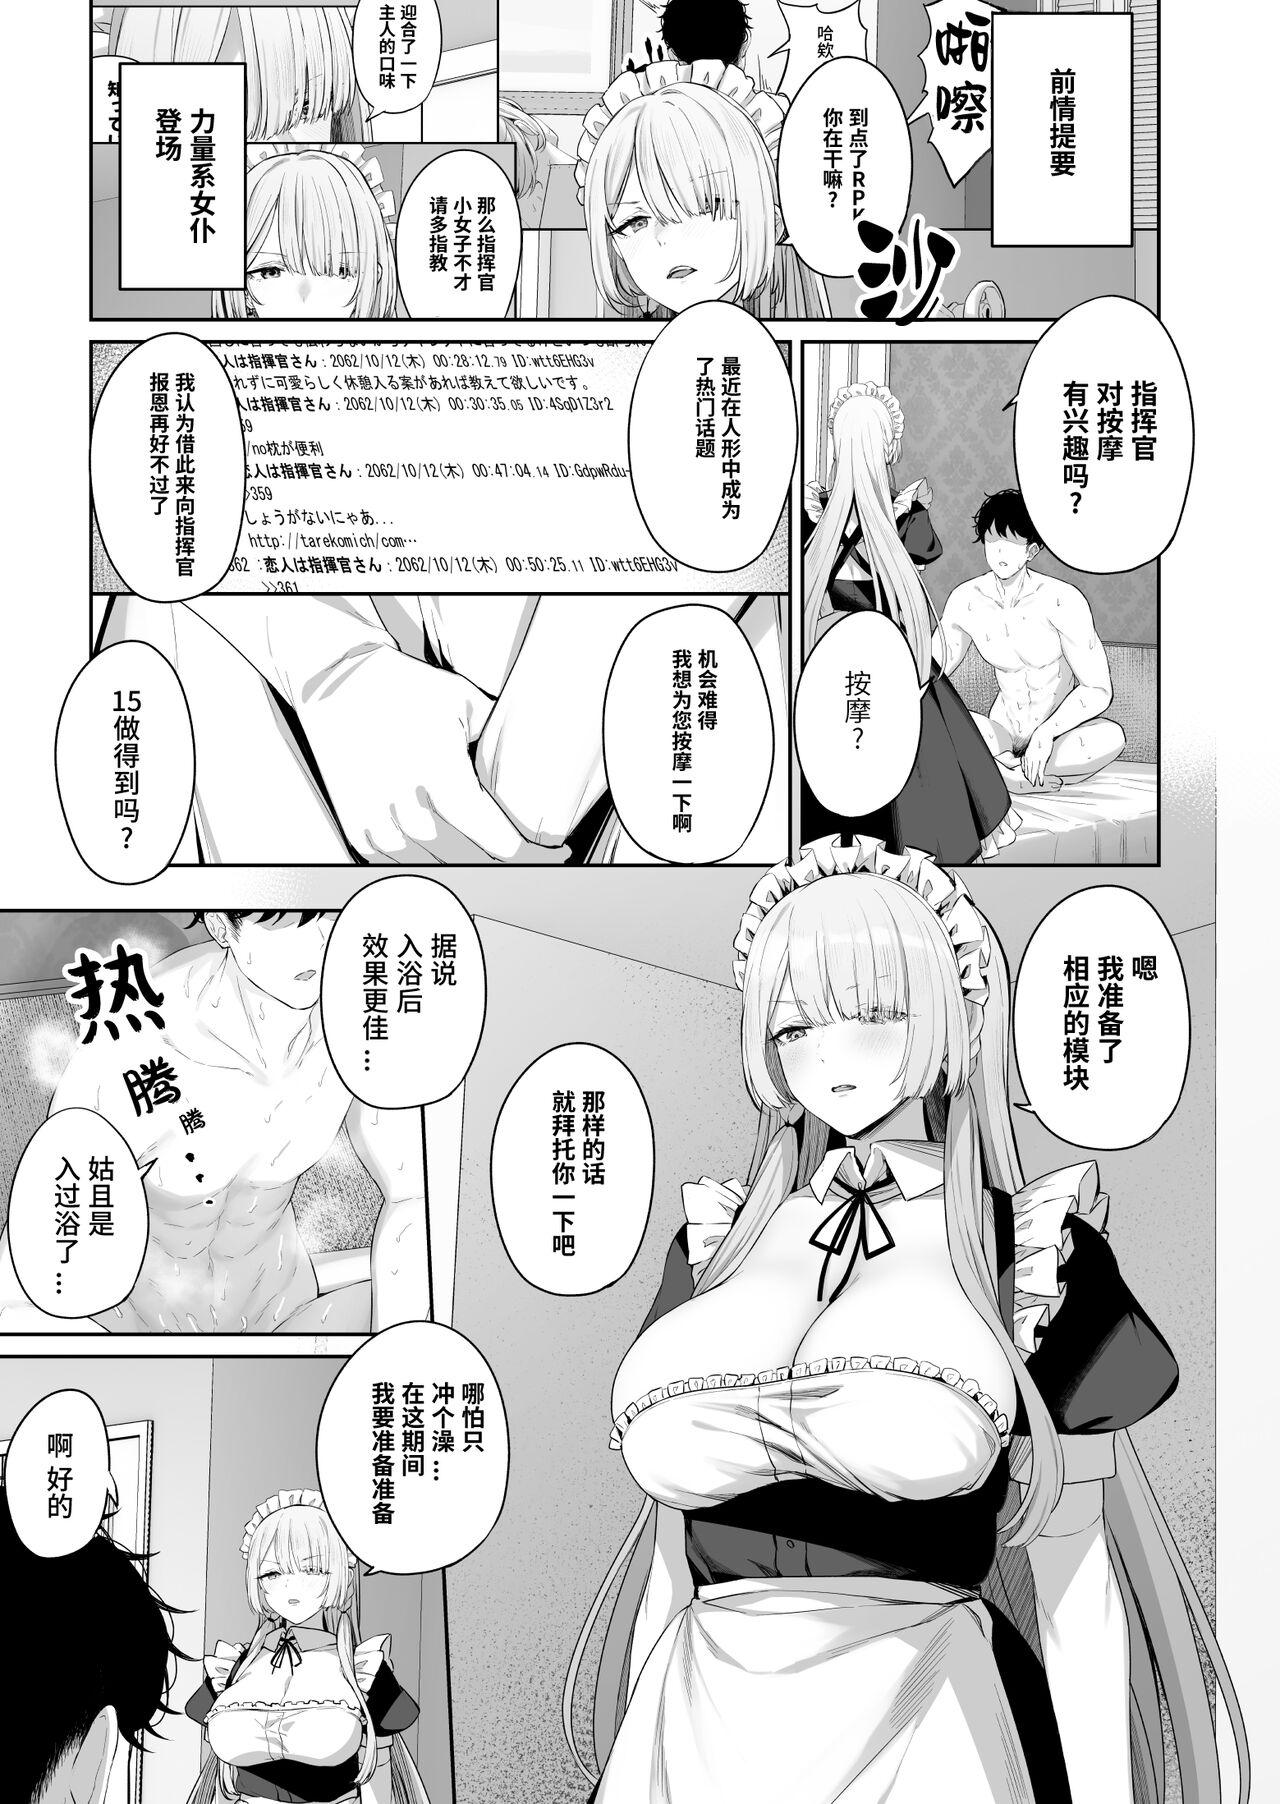 Price AK15の進捗1 - Girls frontline Massages - Picture 2